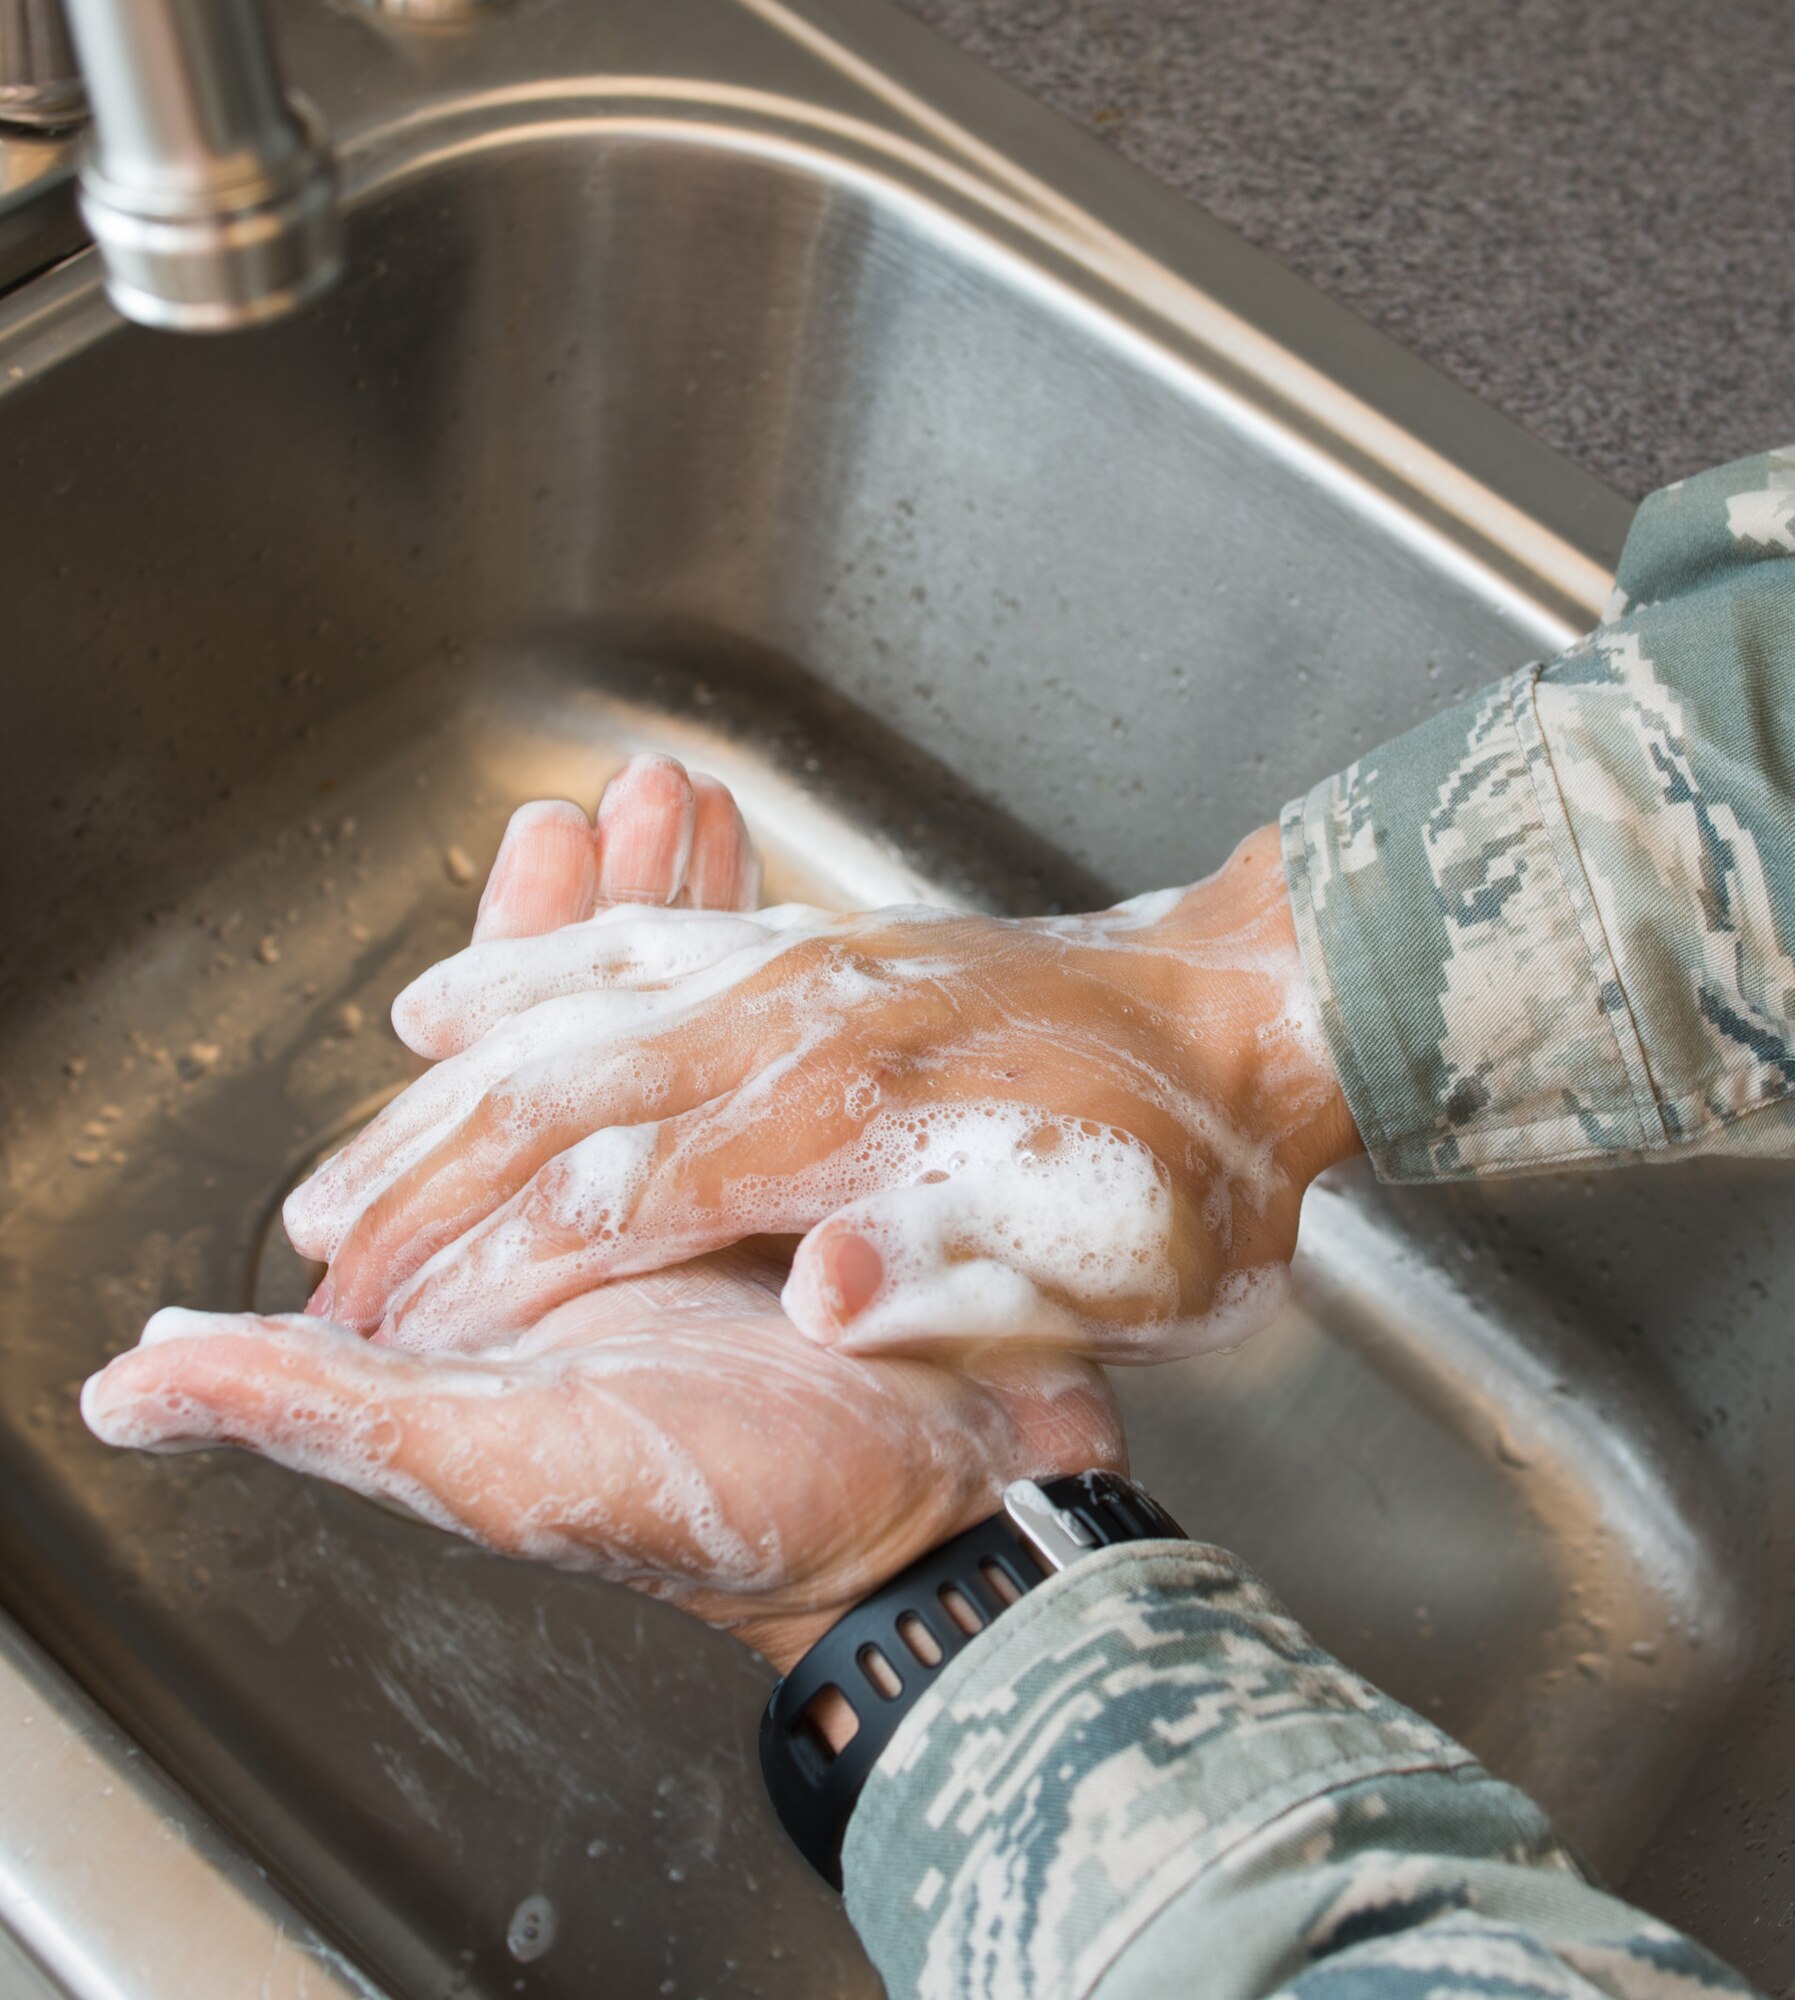 Travis Airman washes his hands while practicing good water conservation habits April 17 in the break room. Turning off the faucet while washing your hands or showering can save hundreds of gallons of water per day.